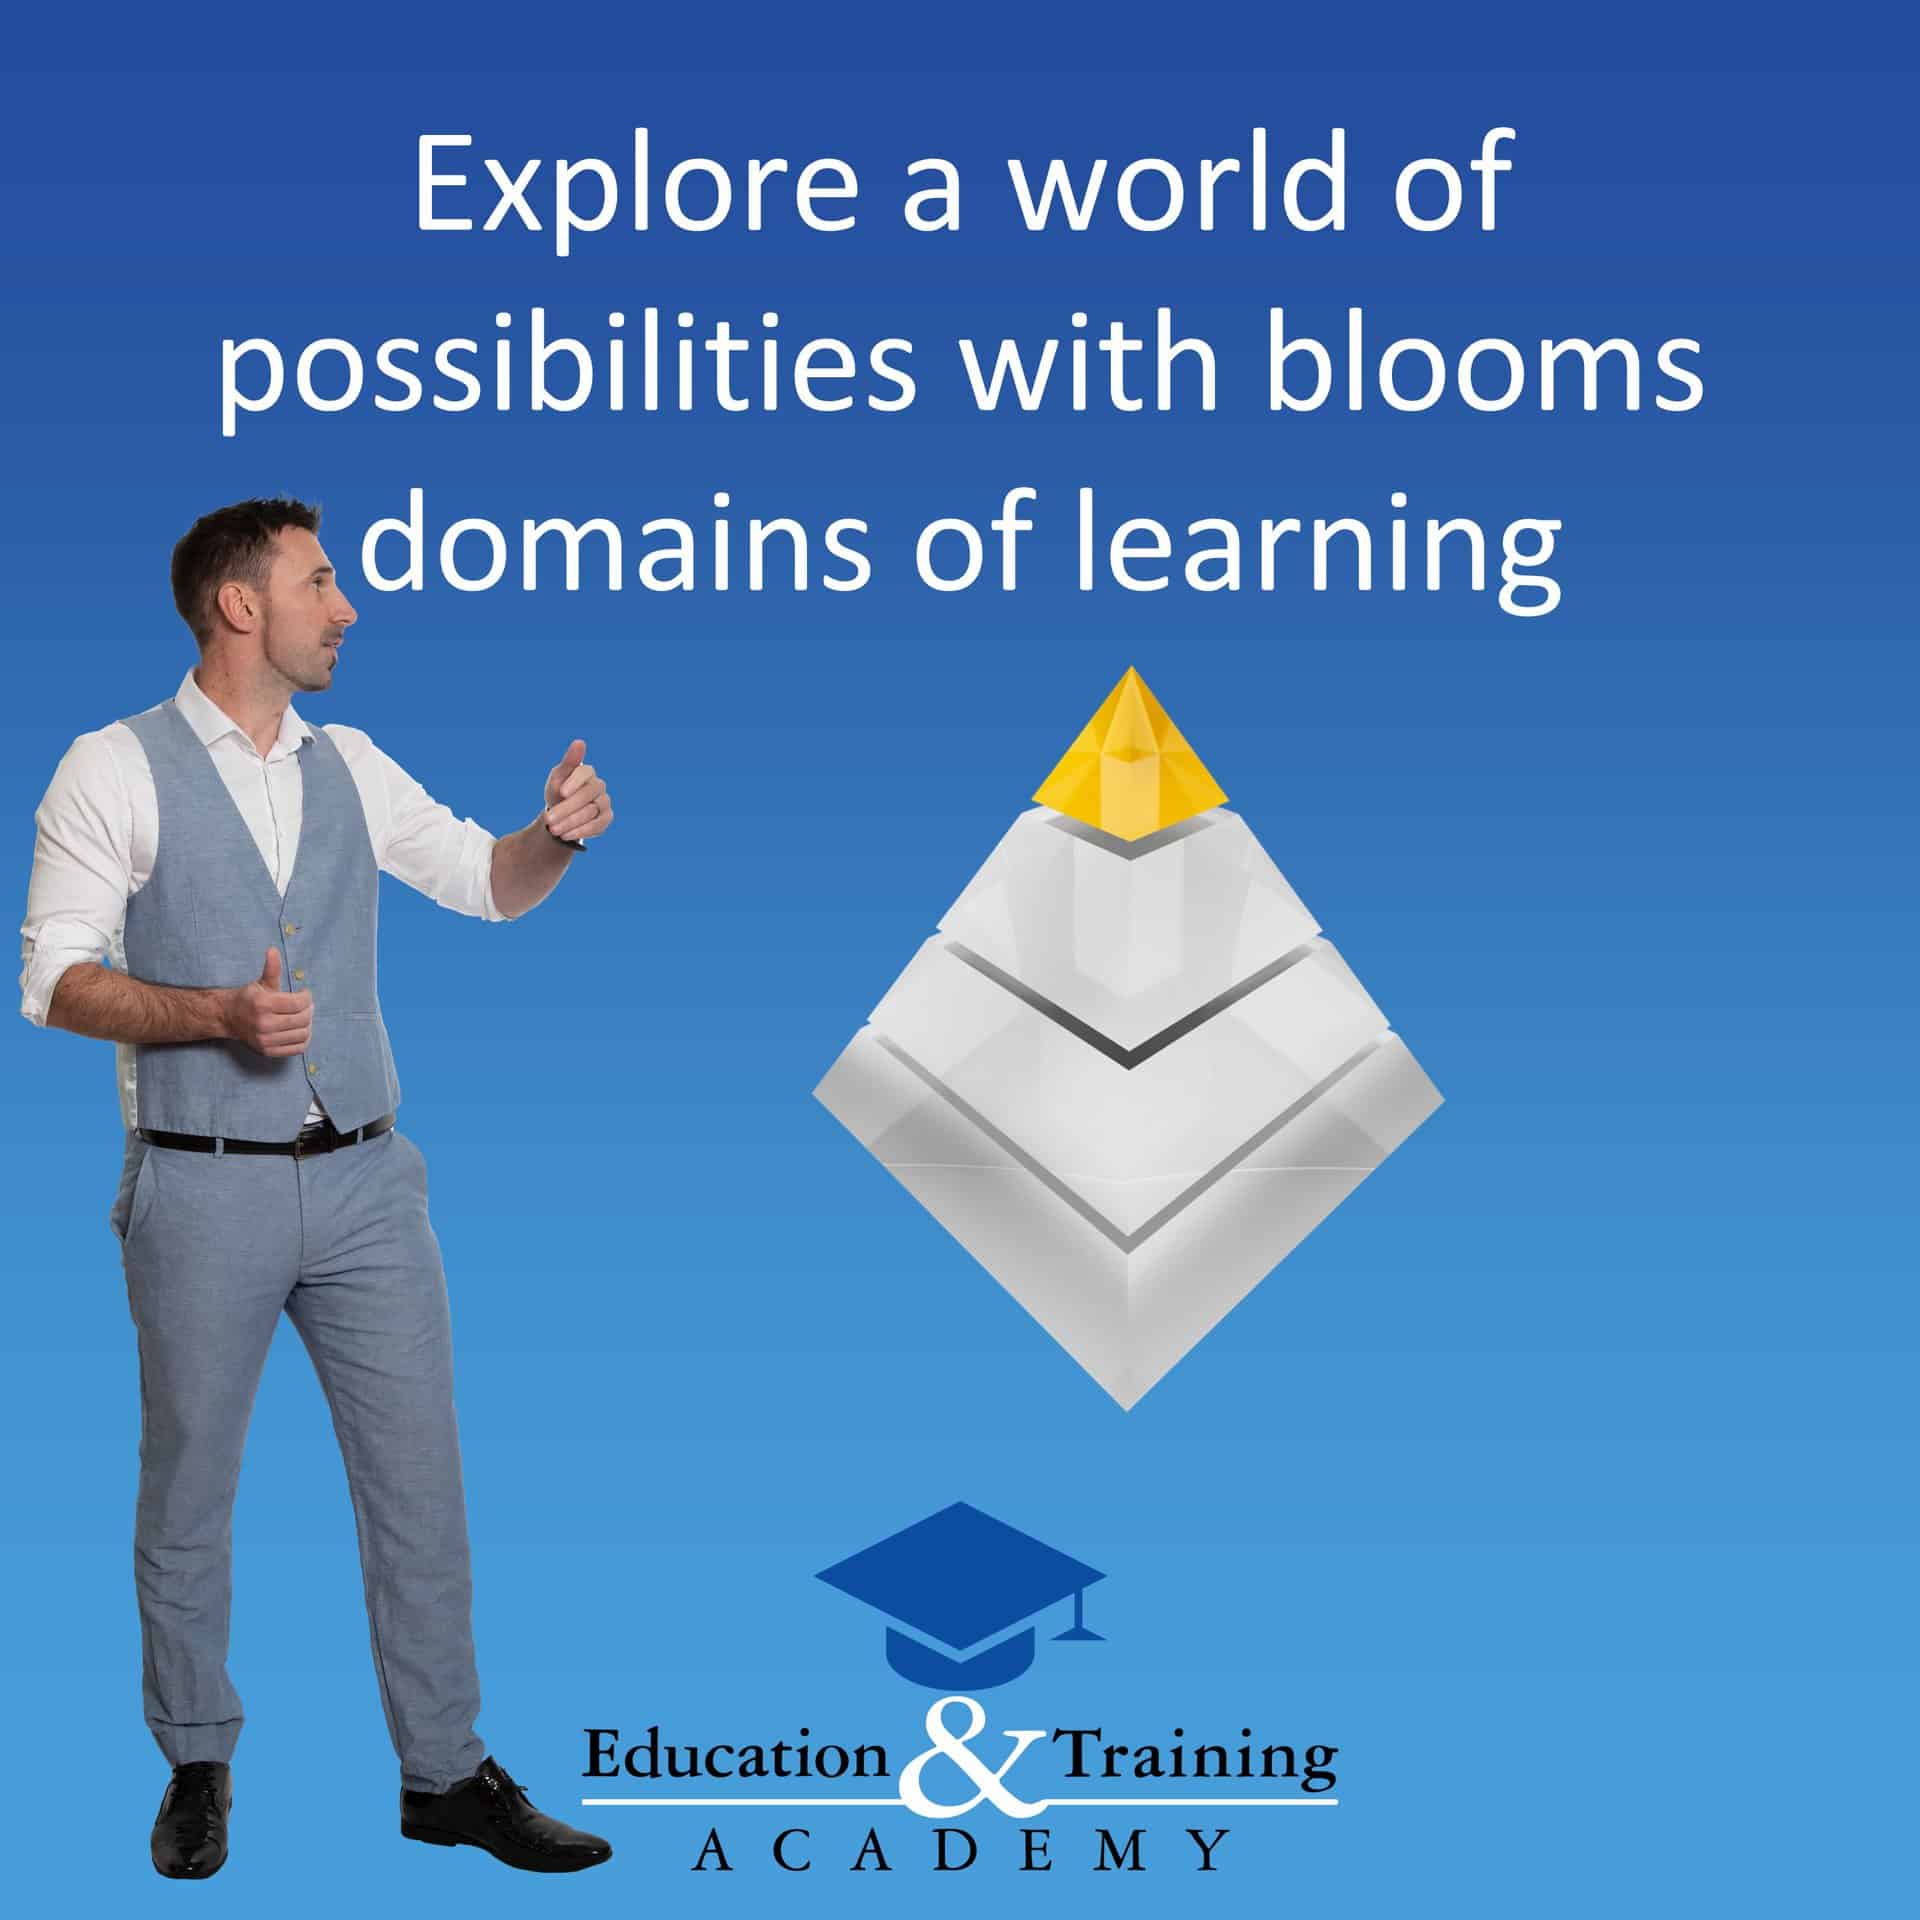 blooms domains of learning